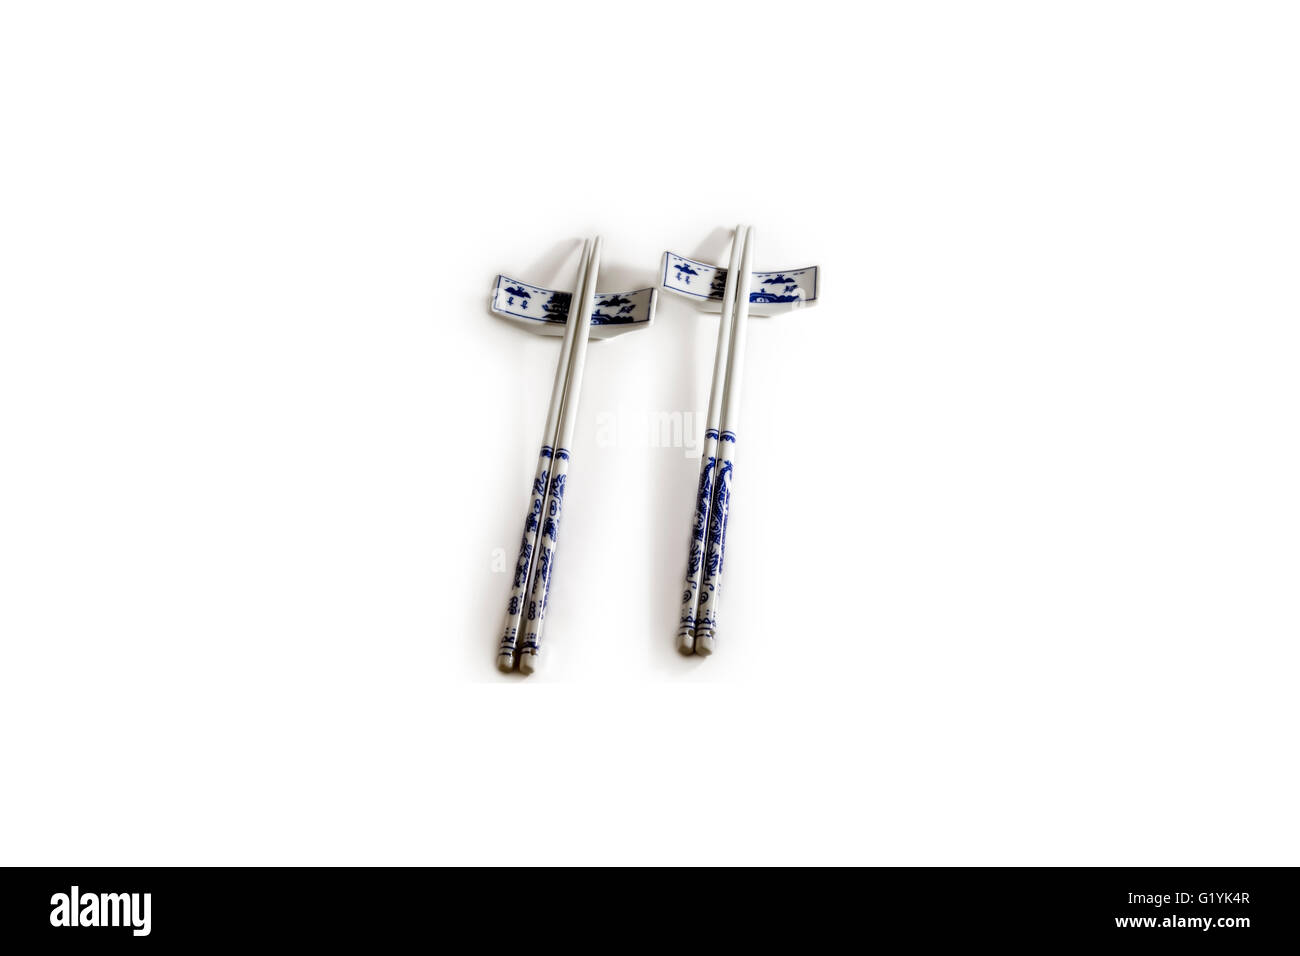 Lay flat image of two pairs of blue and white porcelain chopsticks on rests Stock Photo